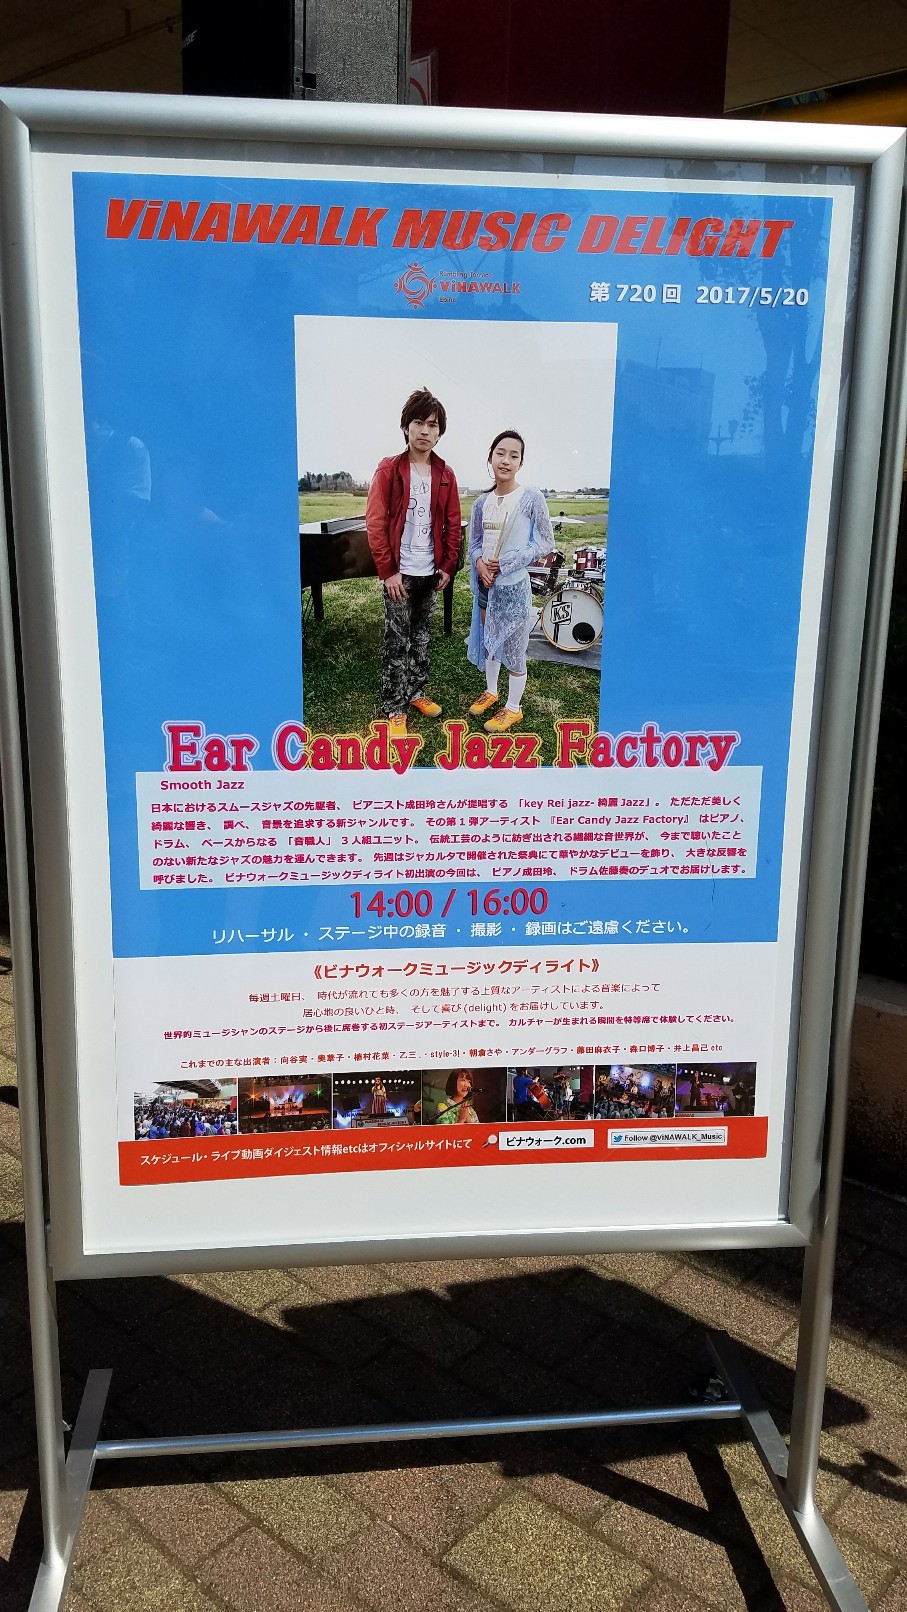 【Liveレポート】Ear Candy Jazz Factory (Duo) @ ビナウォークの記事より